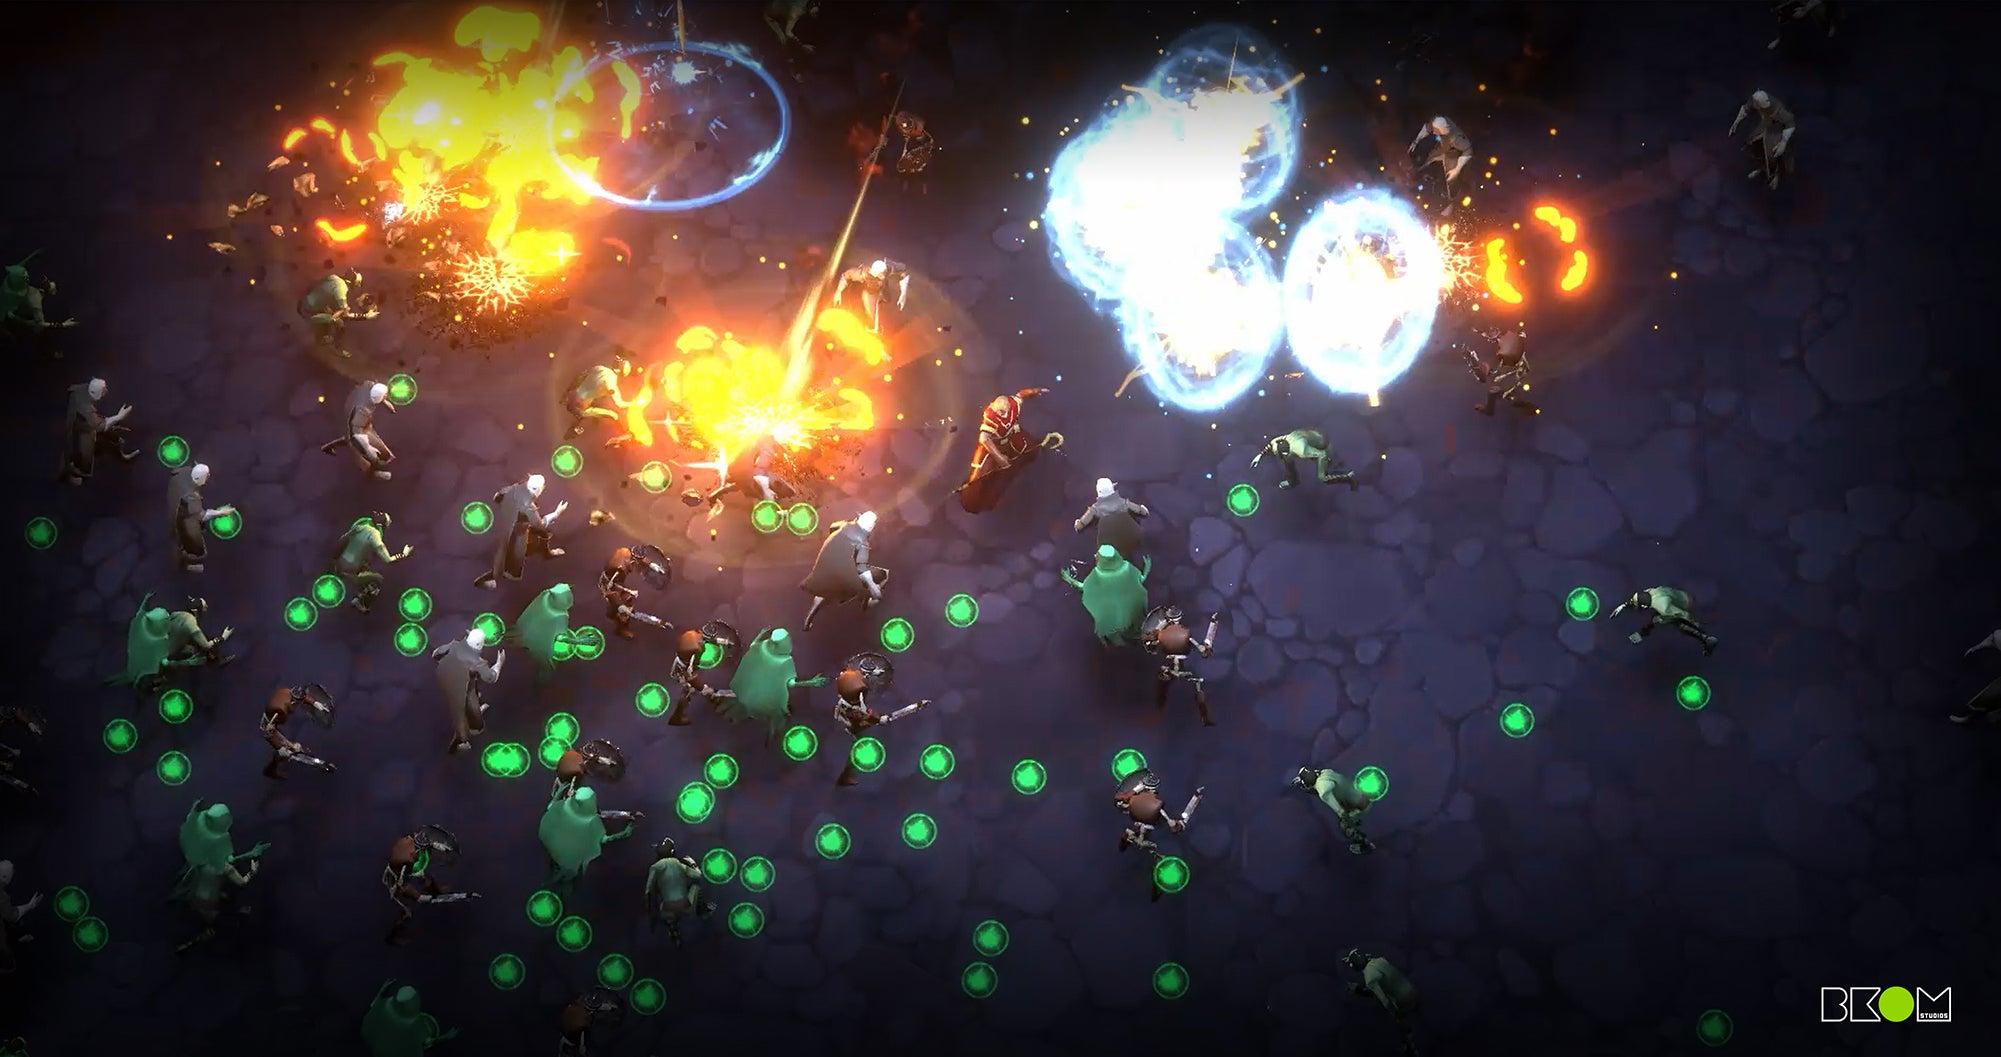 A screenshot of BKOM's Gallowspire Survivors showing player characters in battle with hordes of enemies.